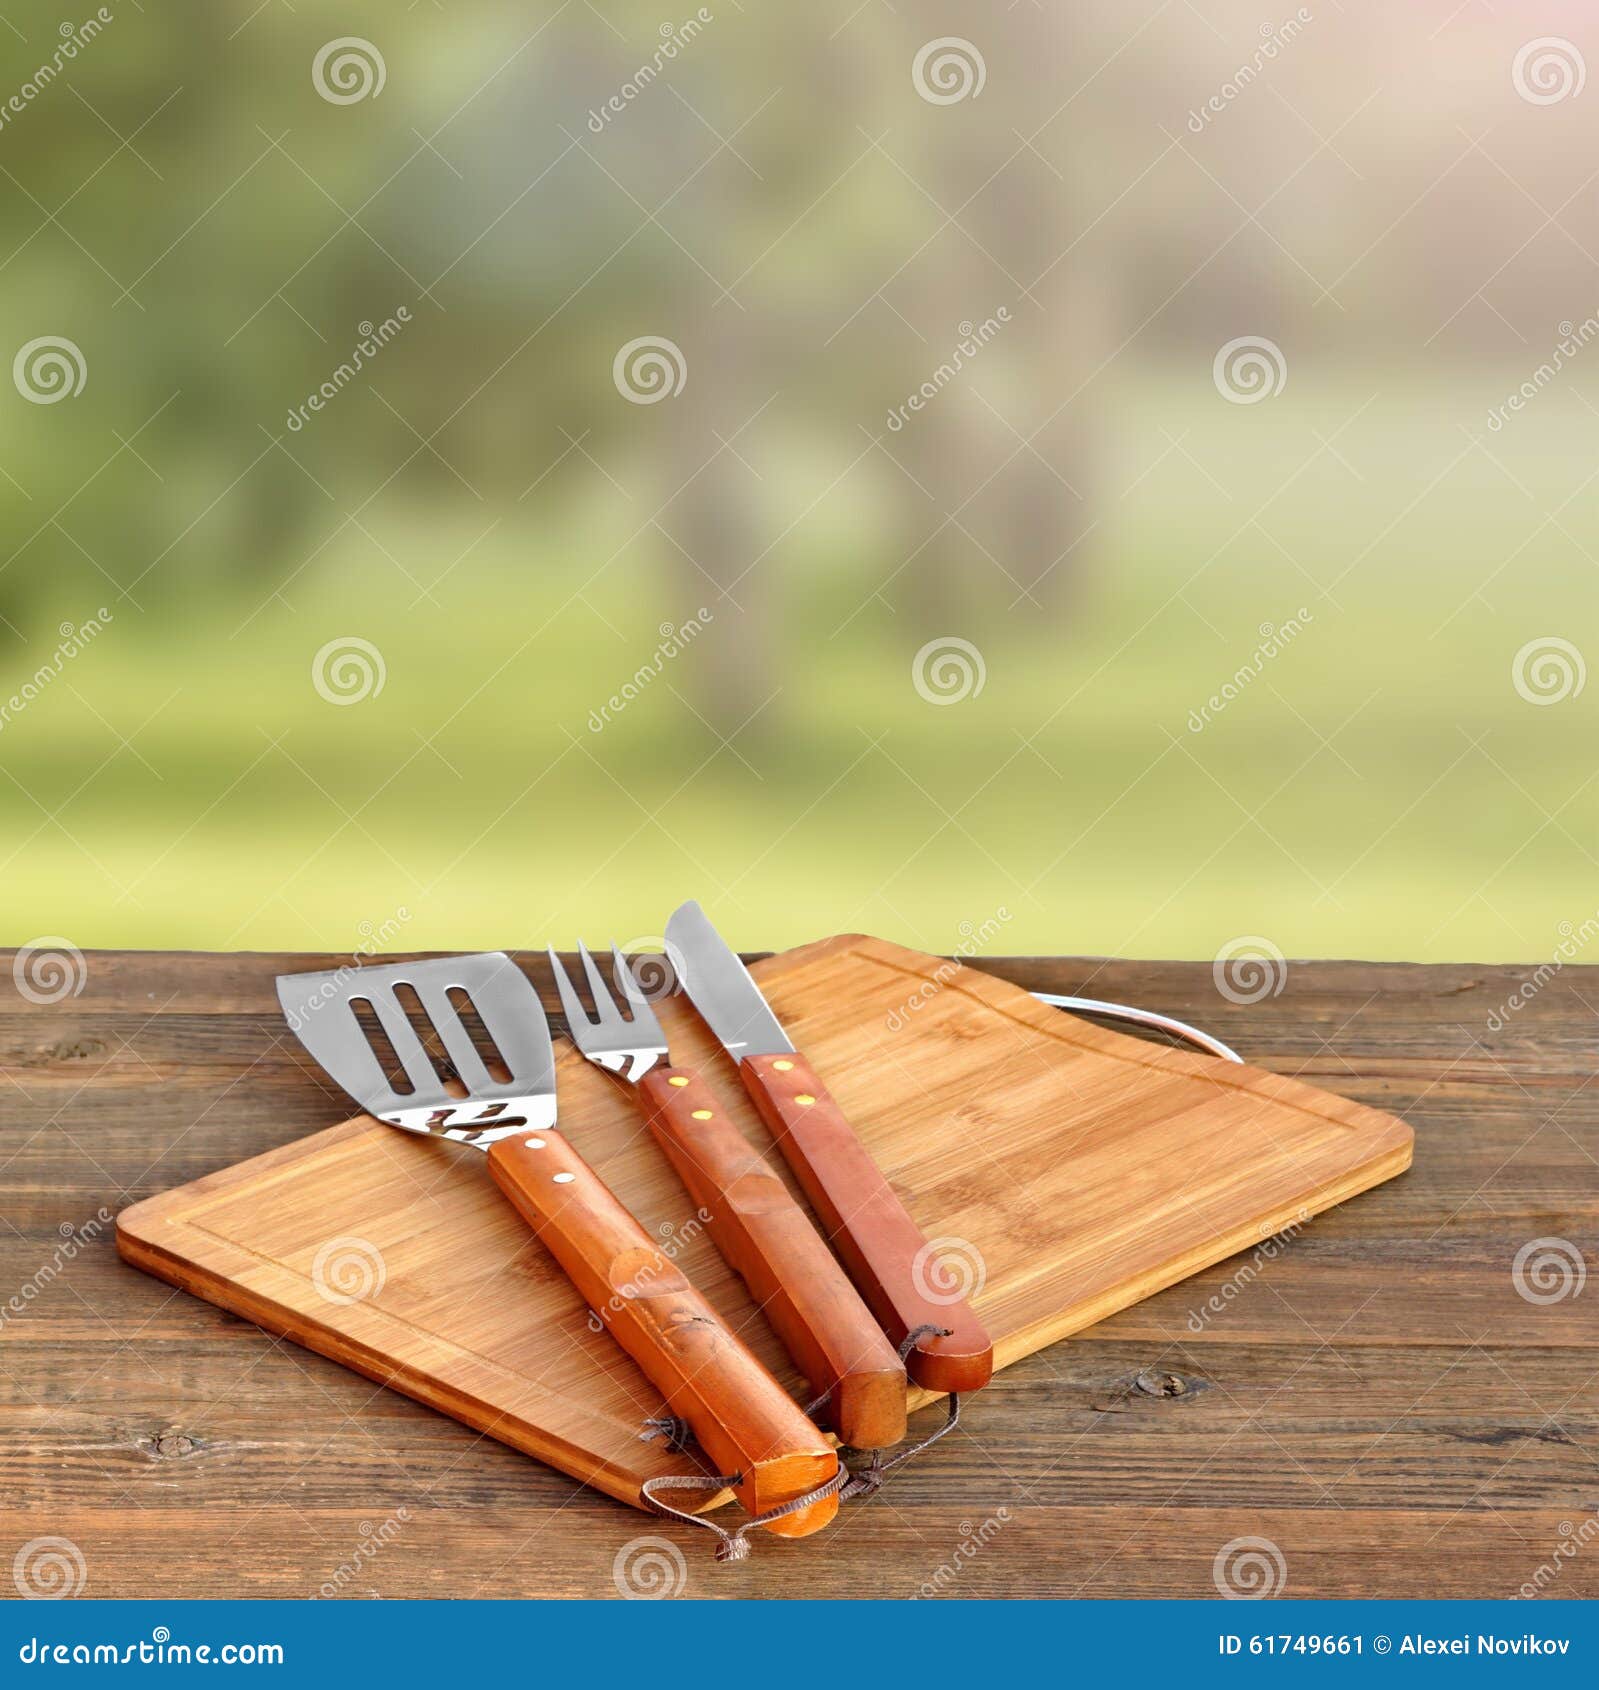 cookout, picnic or bbq party concept with grill tools